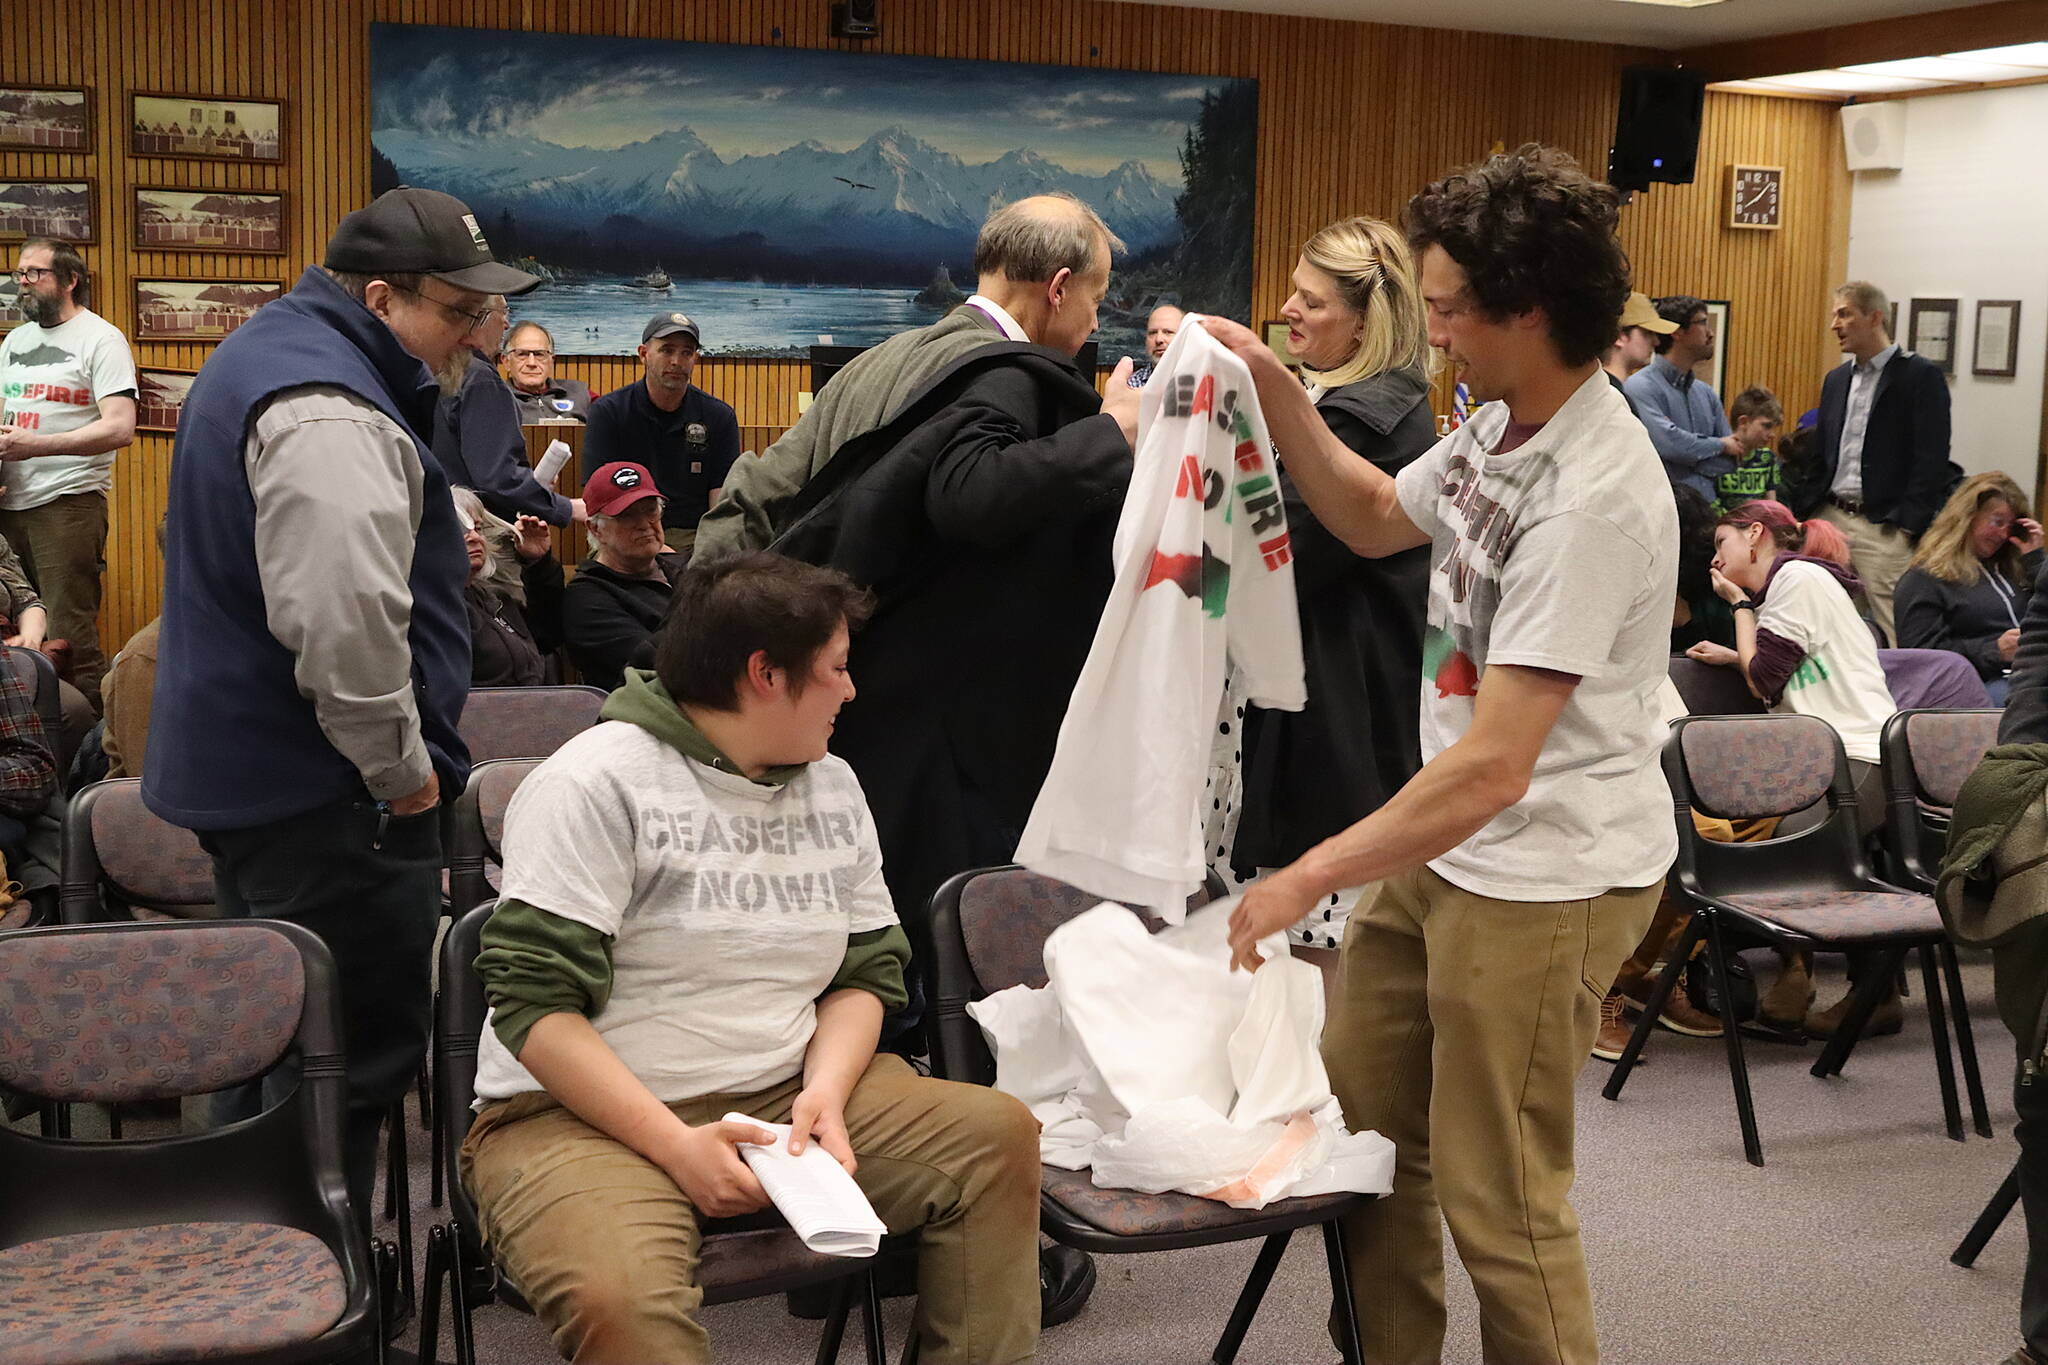 Juneau residents calling for a ceasefire in Gaza put on t-shirts with slogans declaring their cause before testifying on a resolution calling for “a bilateral peace agreement in Israel and Palestine” considered by the Juneau Assembly on Monday night. (Mark Sabbatini / Juneau Empire)